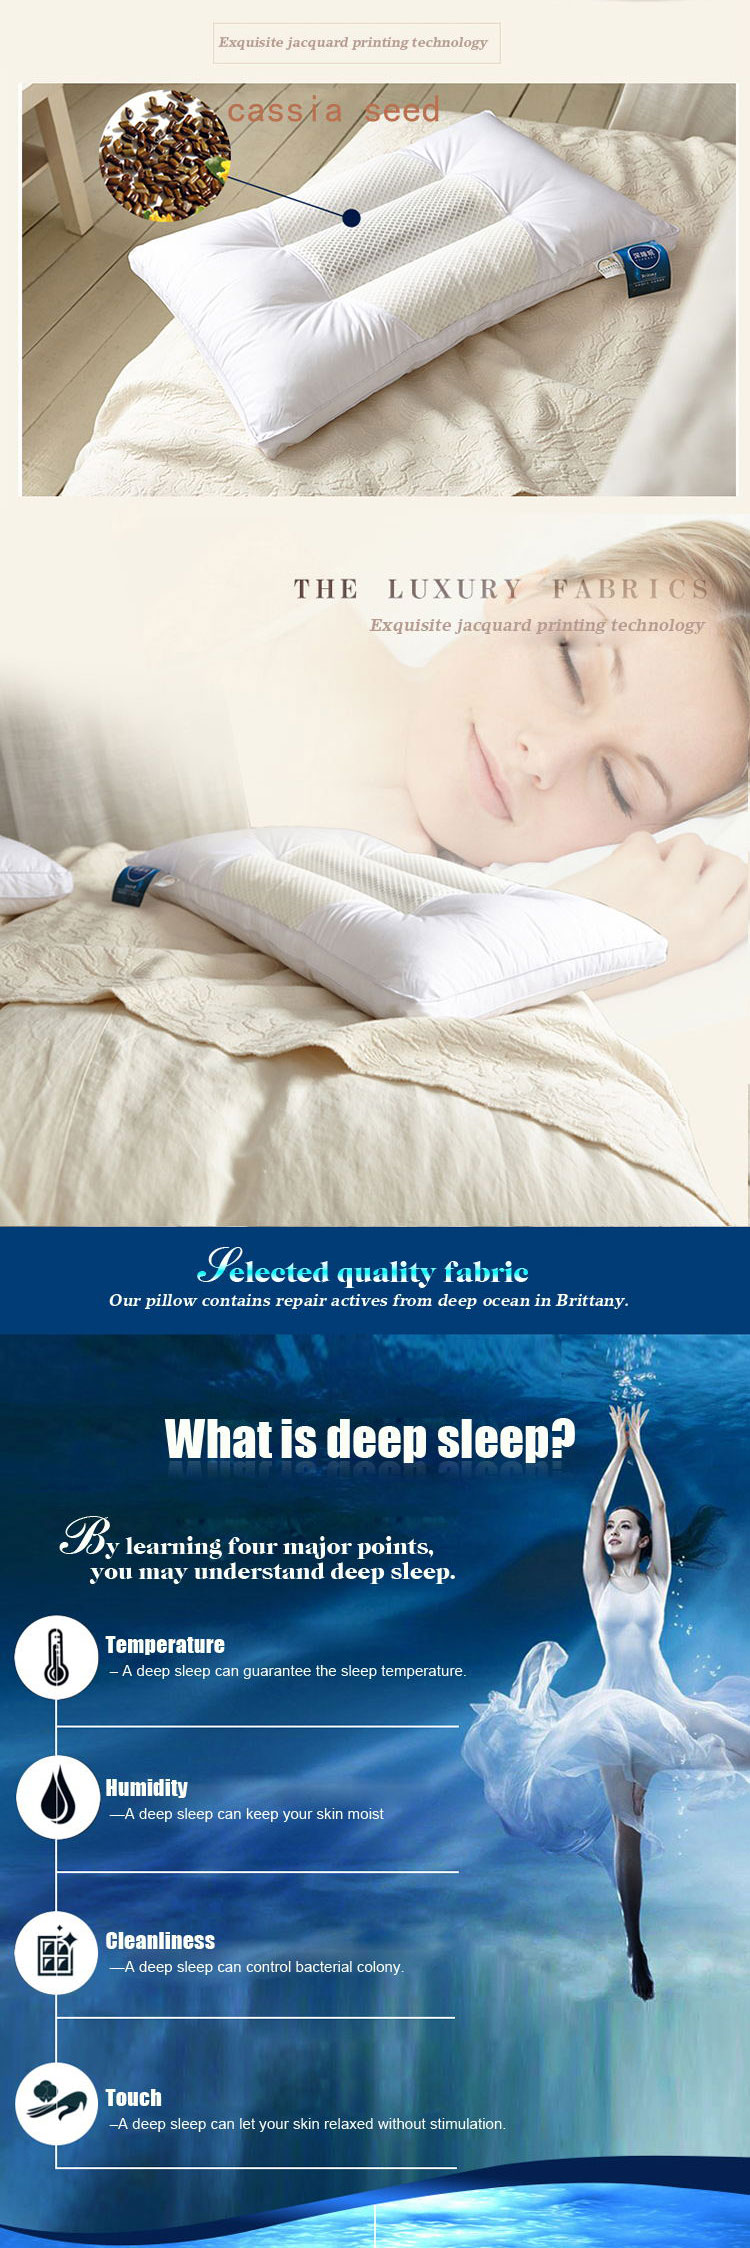 Soft and Comfortable Bed Pillow